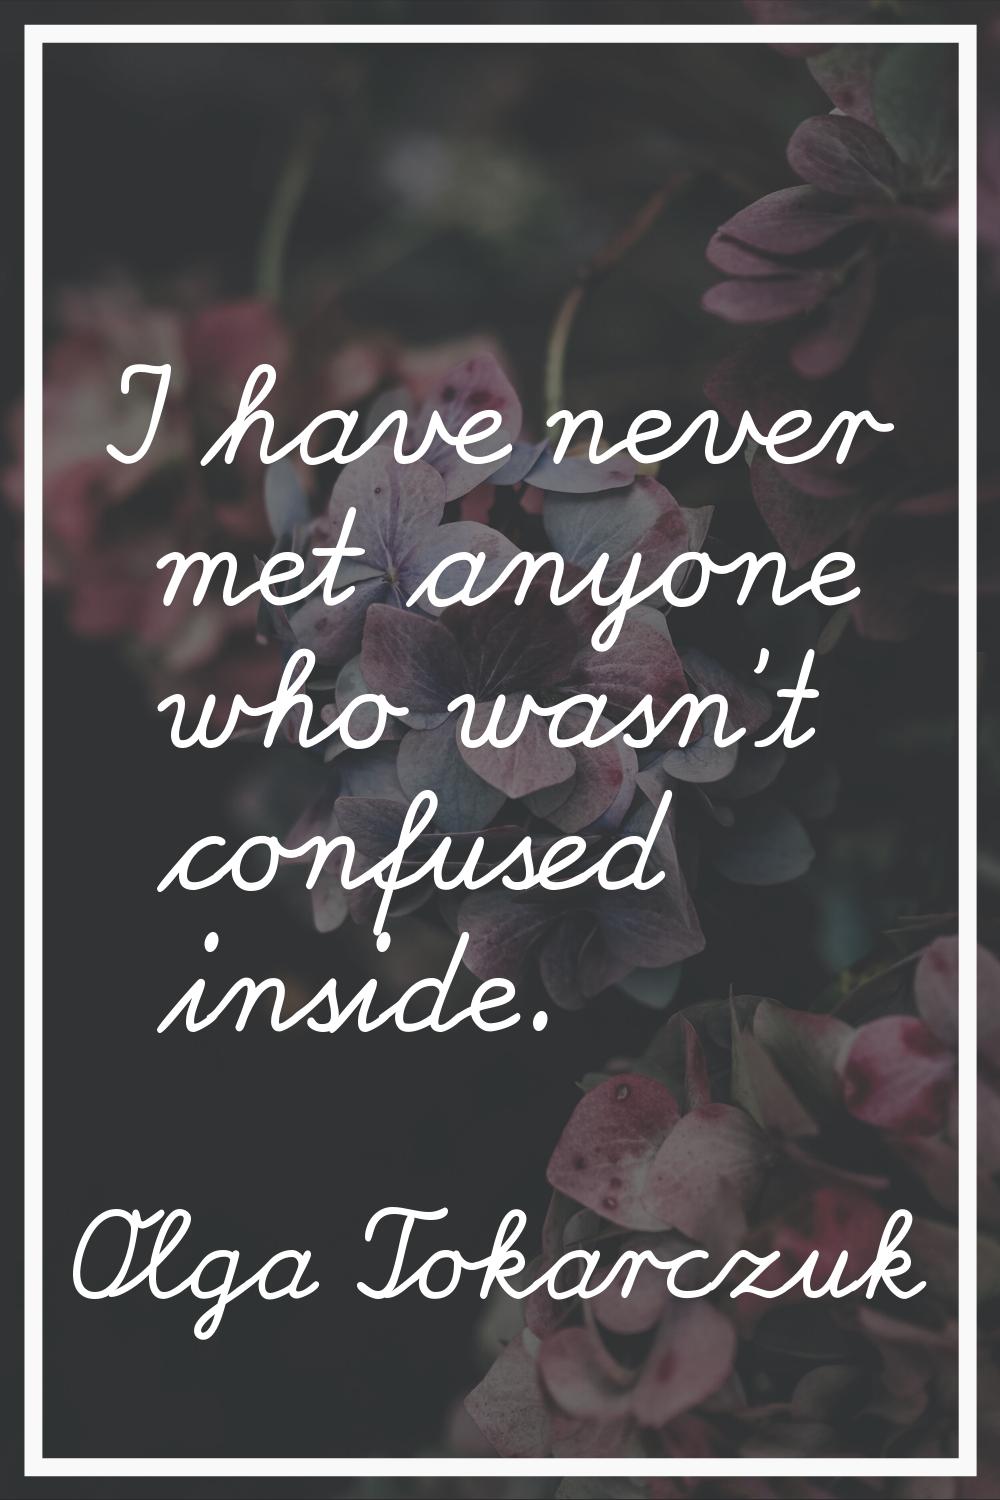 I have never met anyone who wasn't confused inside.